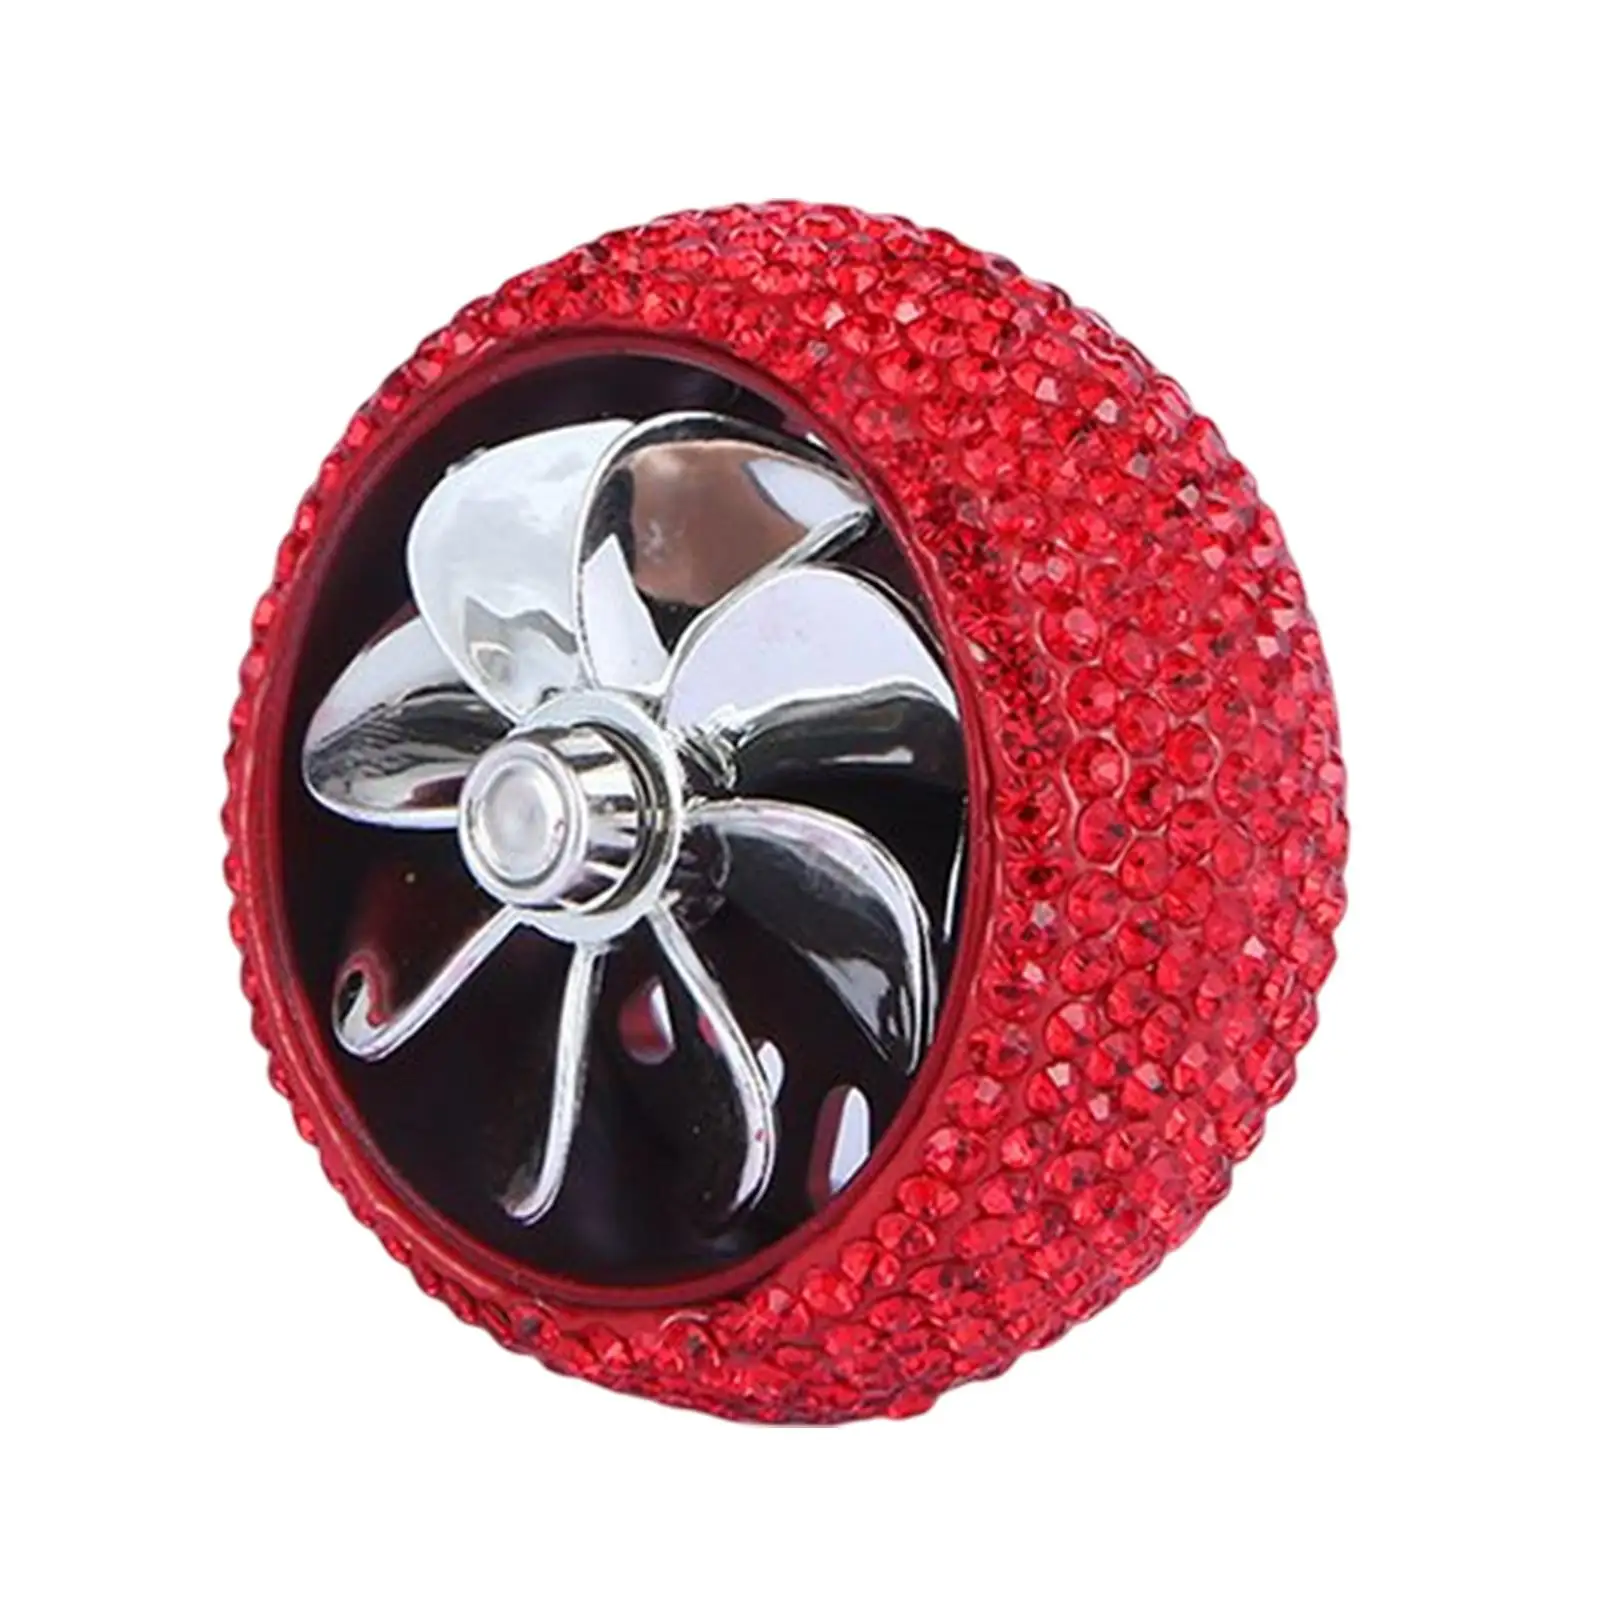 Air Vent Fan Diffuser Gift Decoration Accessories Car Air Outlet Clip